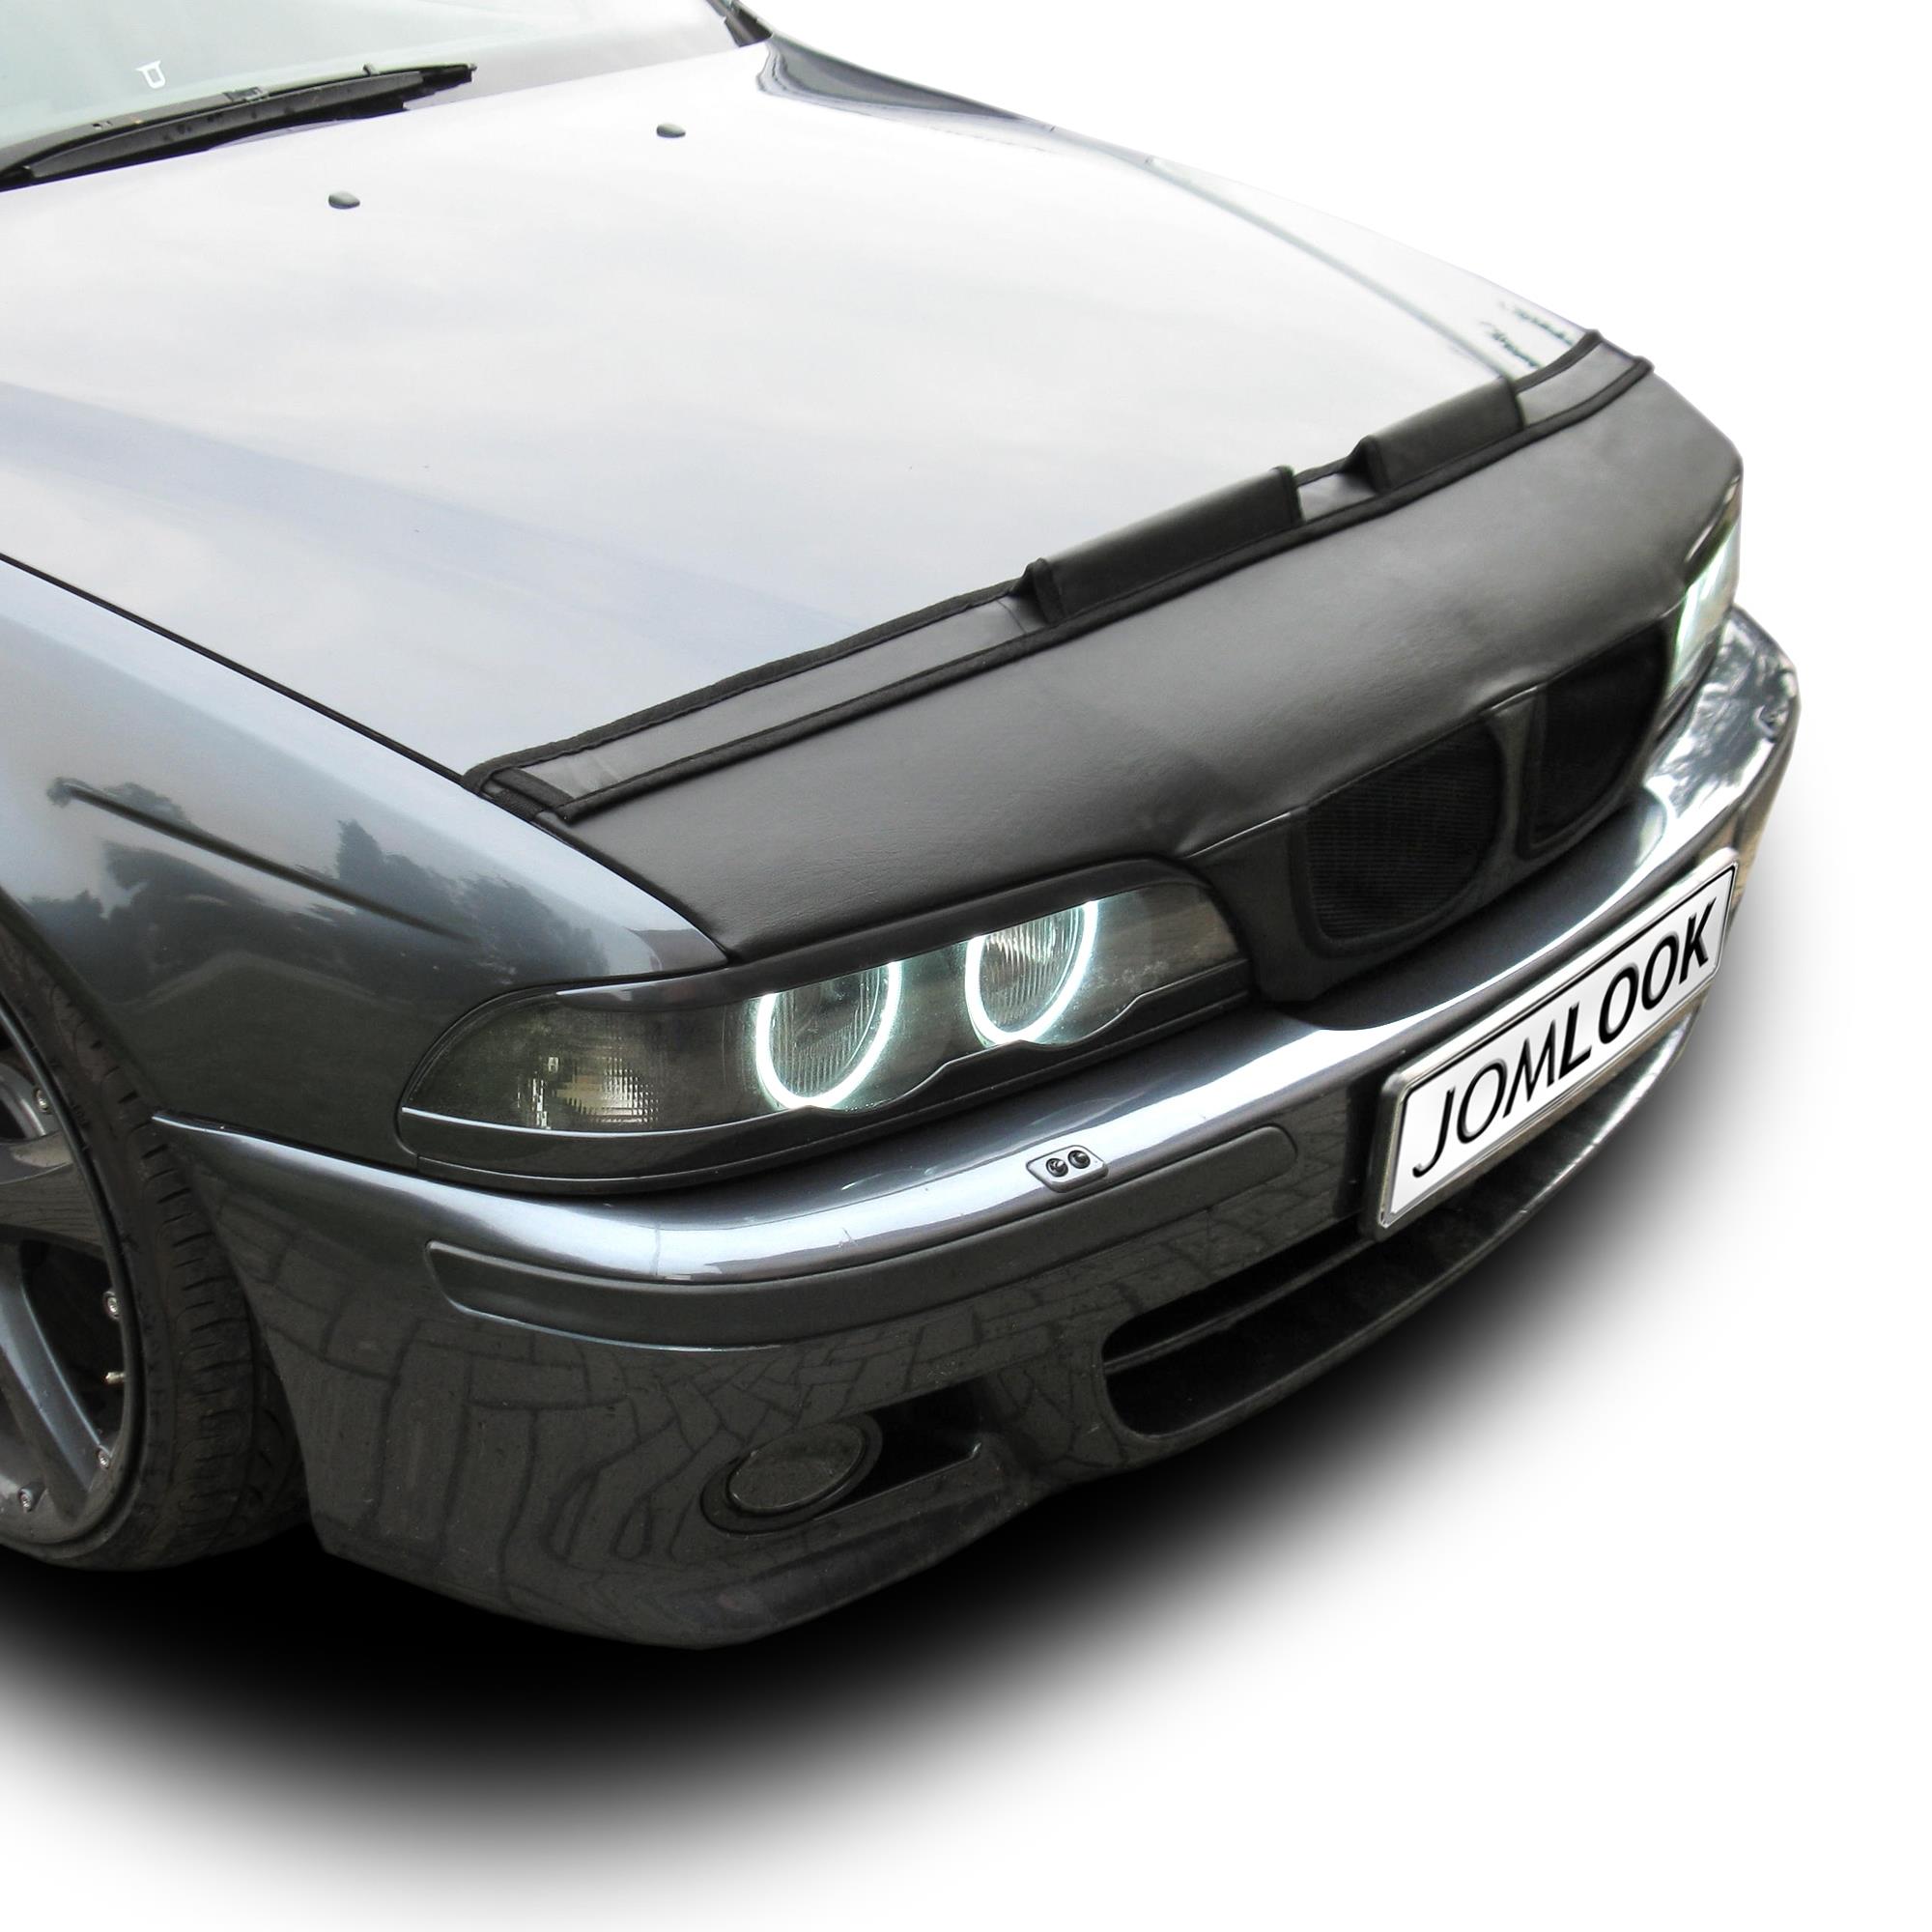 Black fusion artificial leather bmw #3